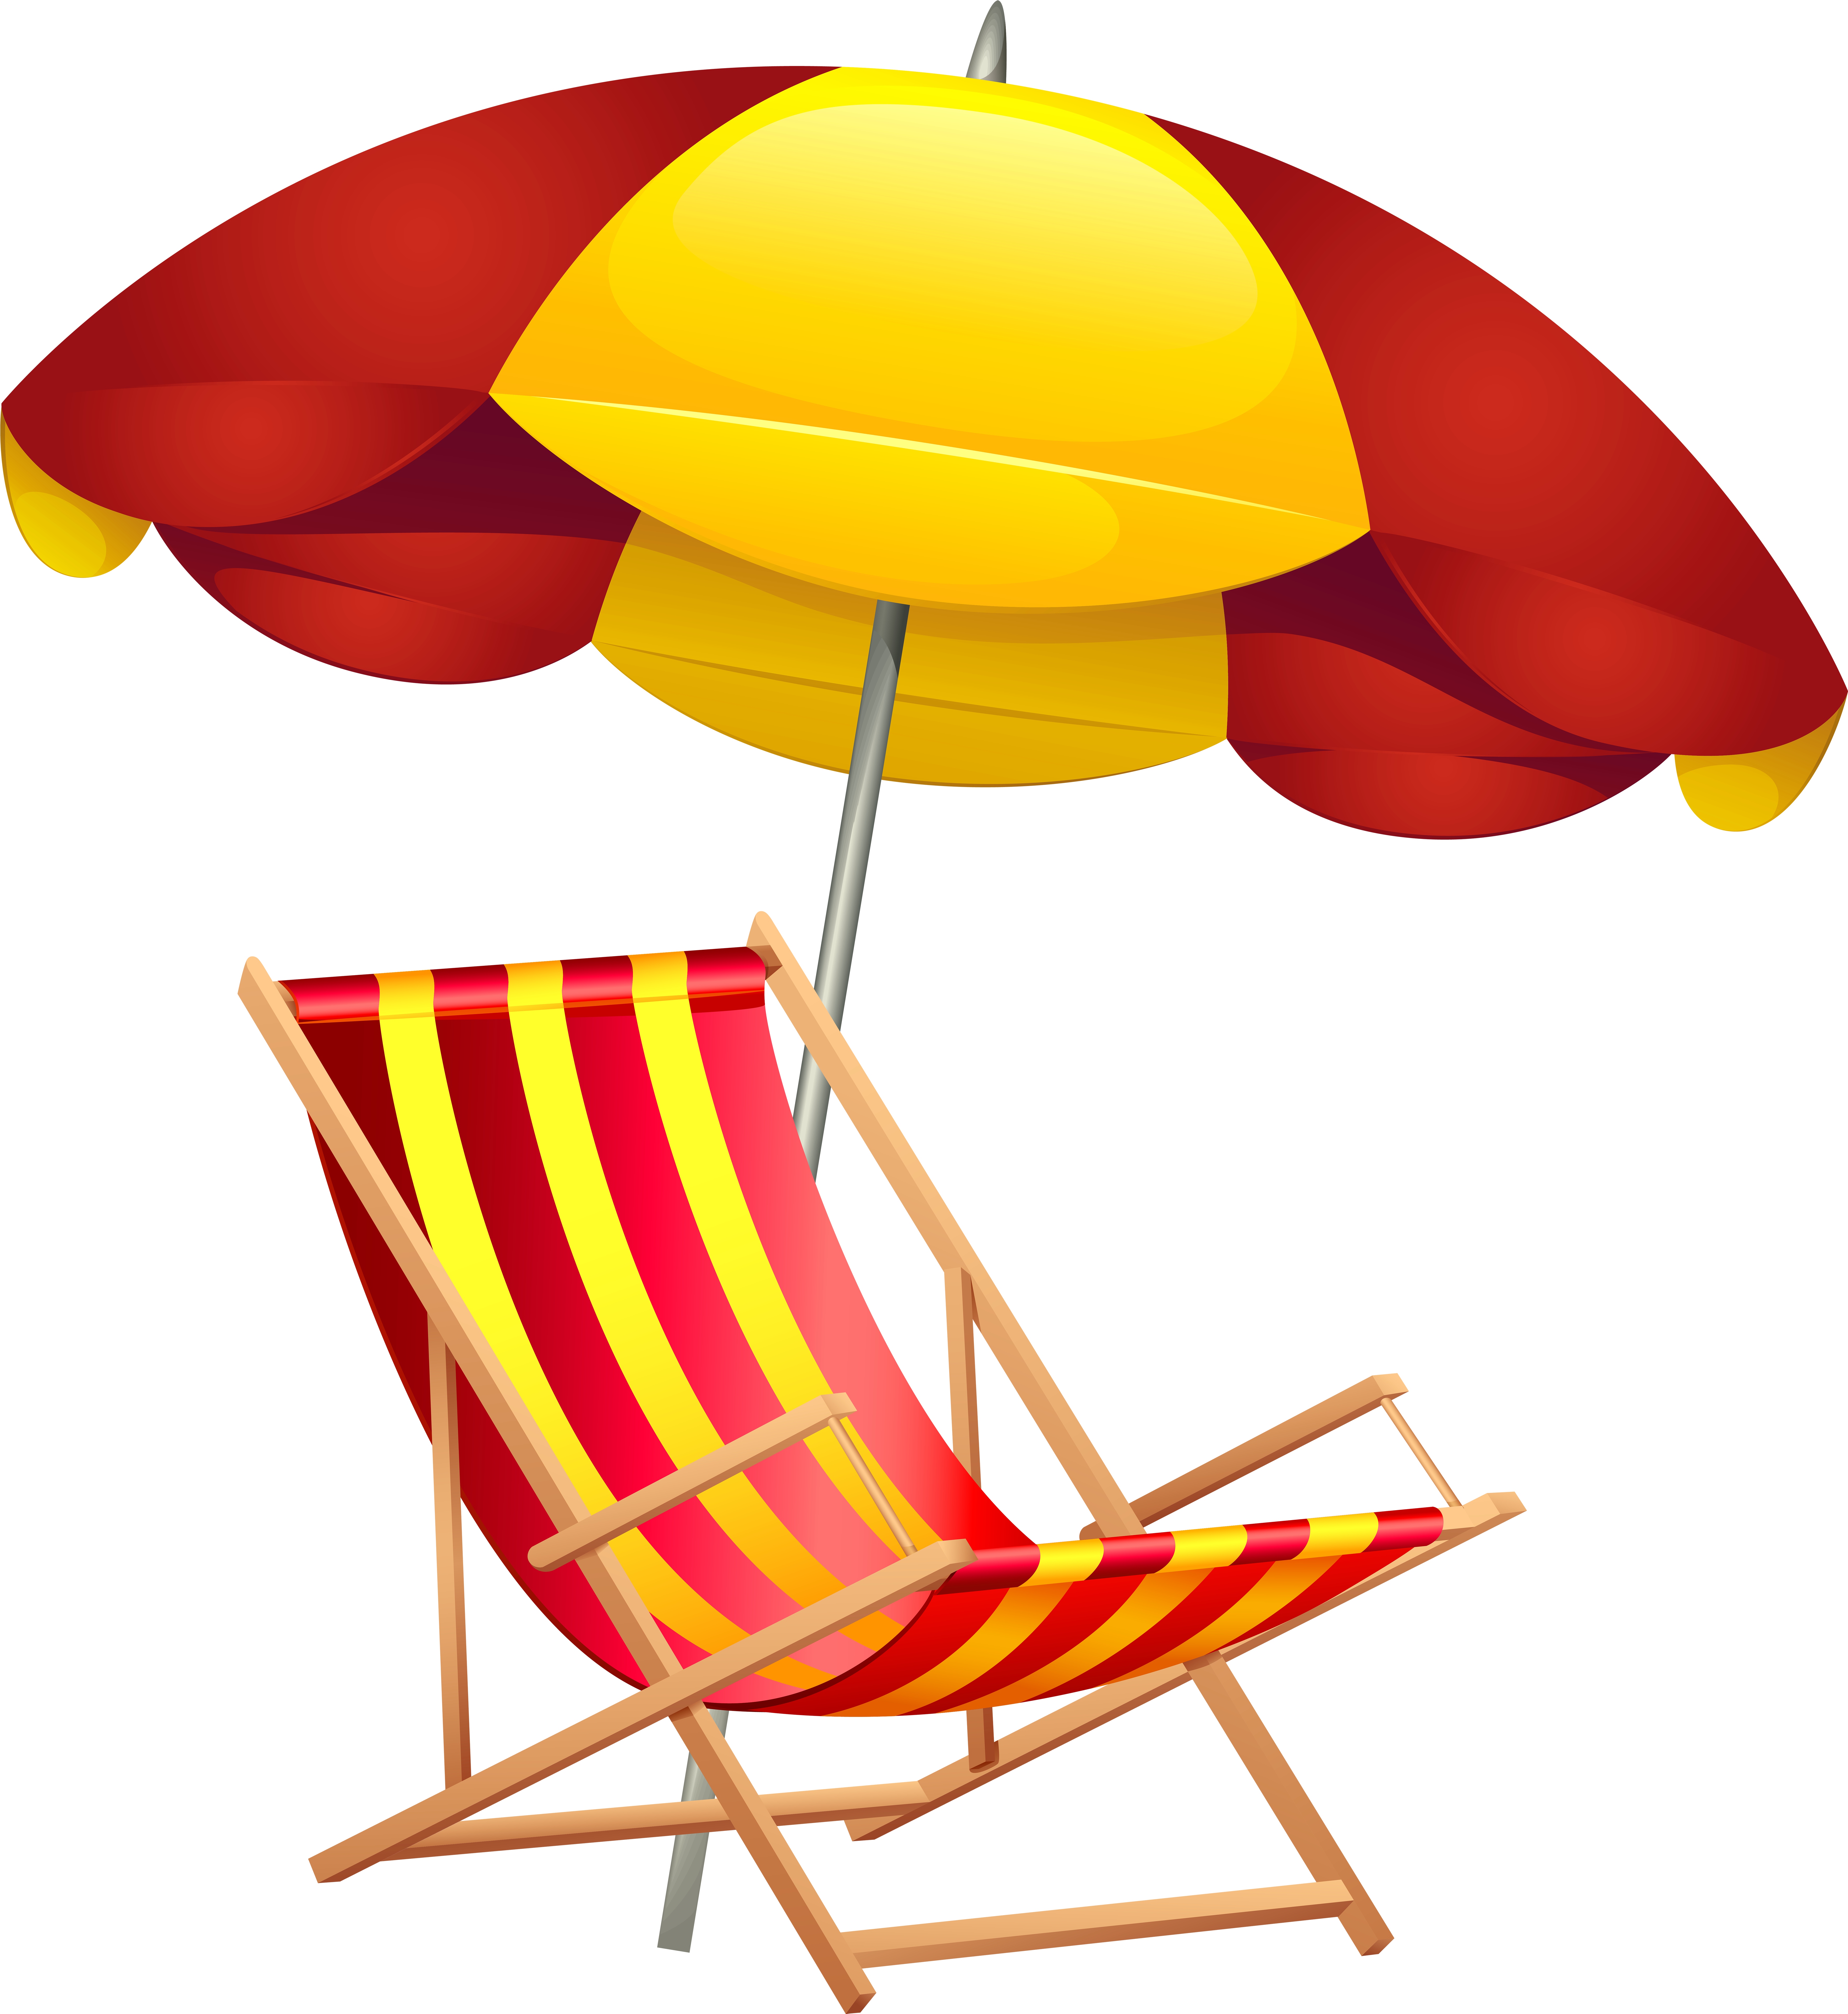 Beach Chair And Umbrella Png Clip Art Image - Beach Chair And Umbrella Png Clip Art Image (7344x8000)